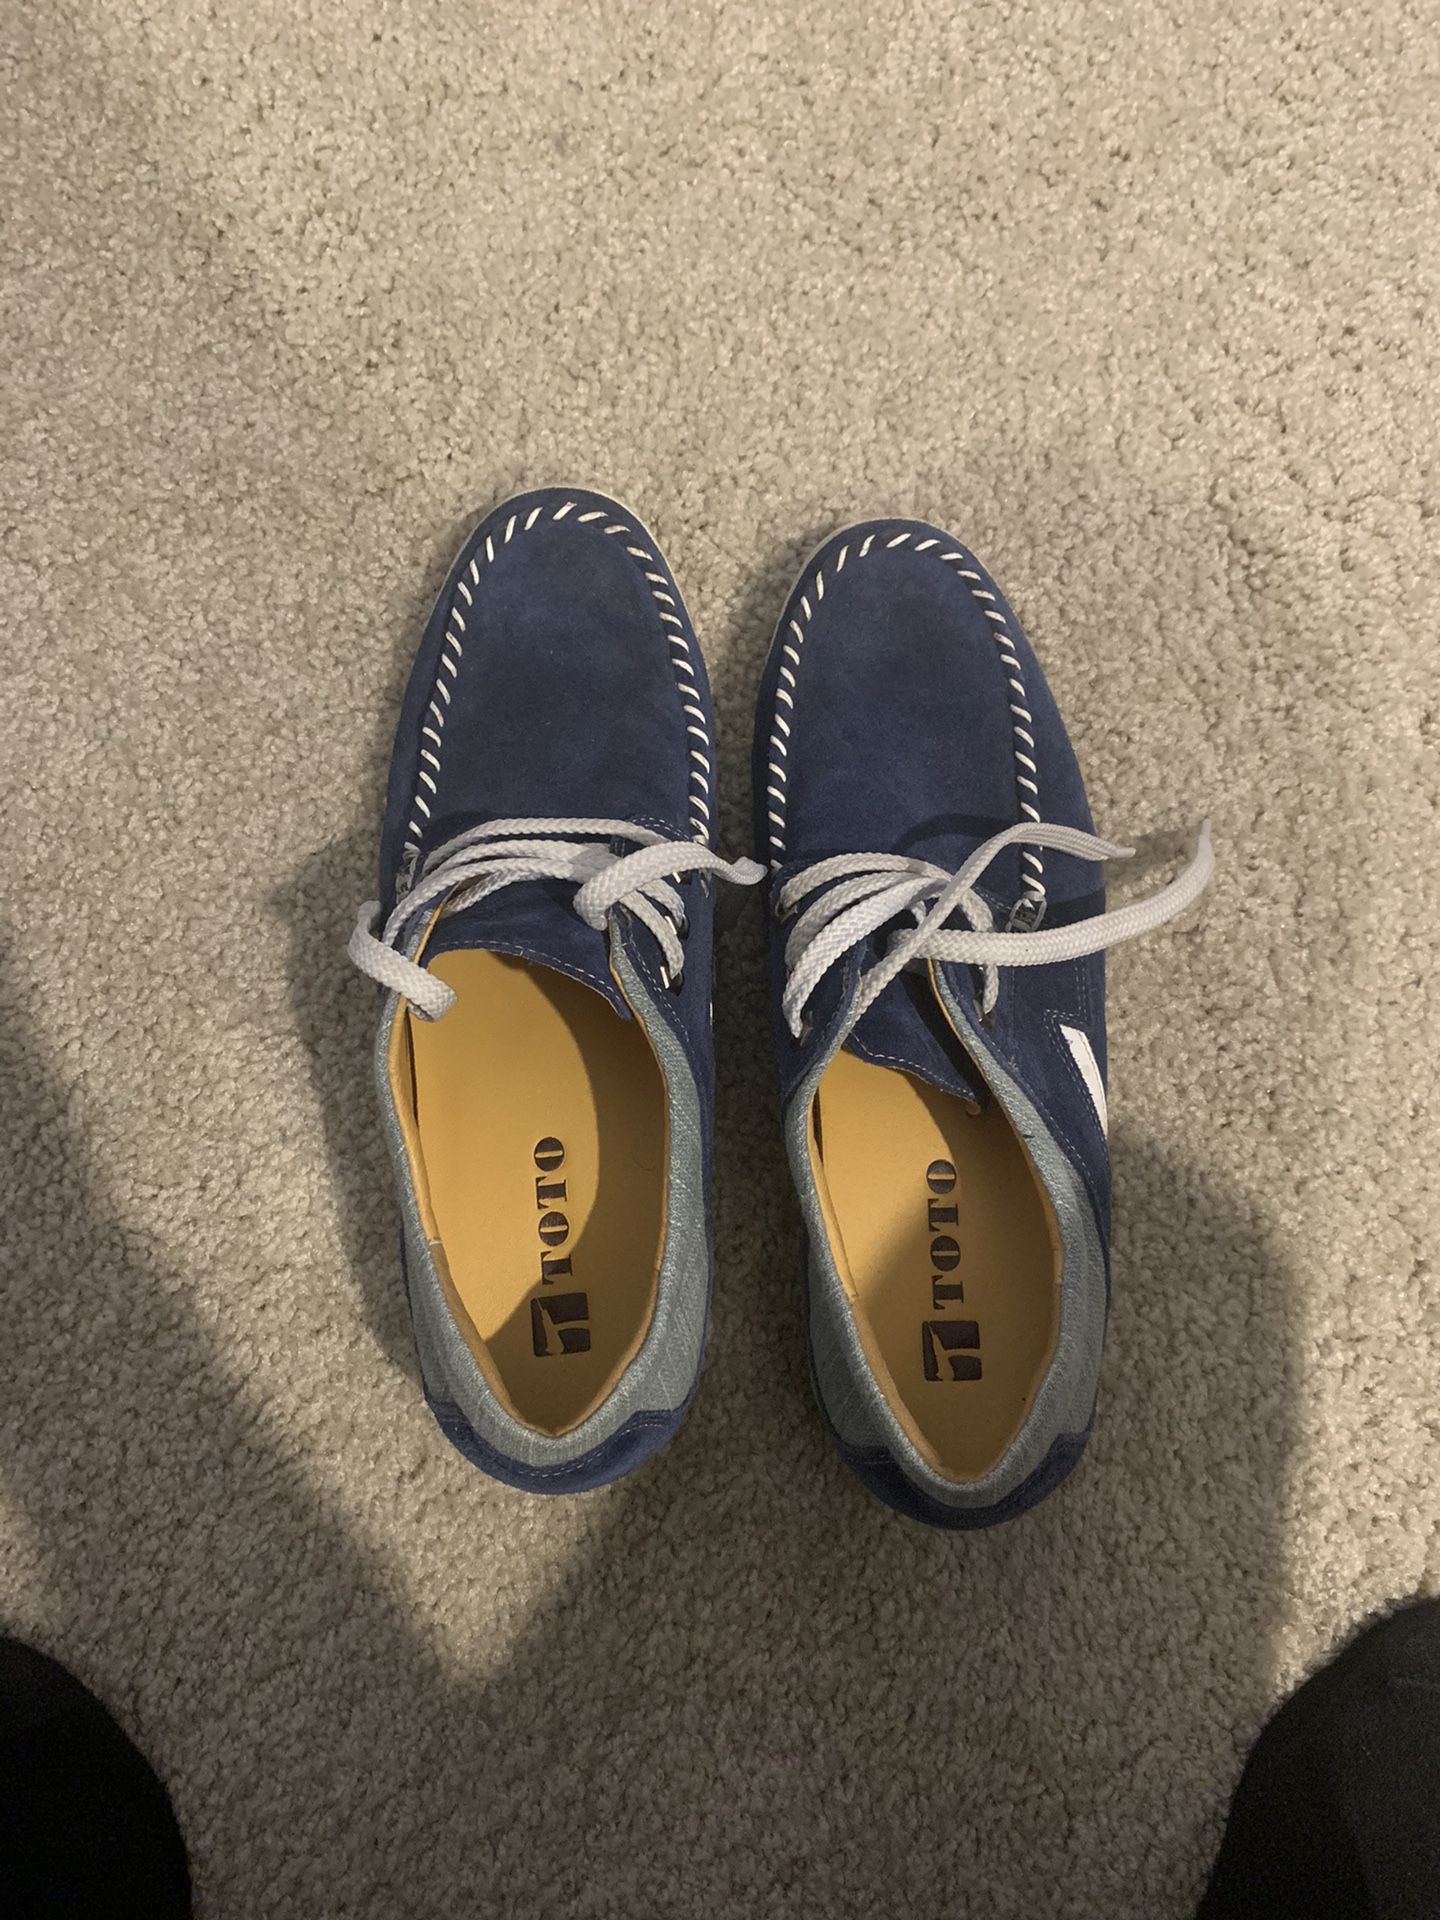 Tall men shoes size 10 (2.4 inches heal)